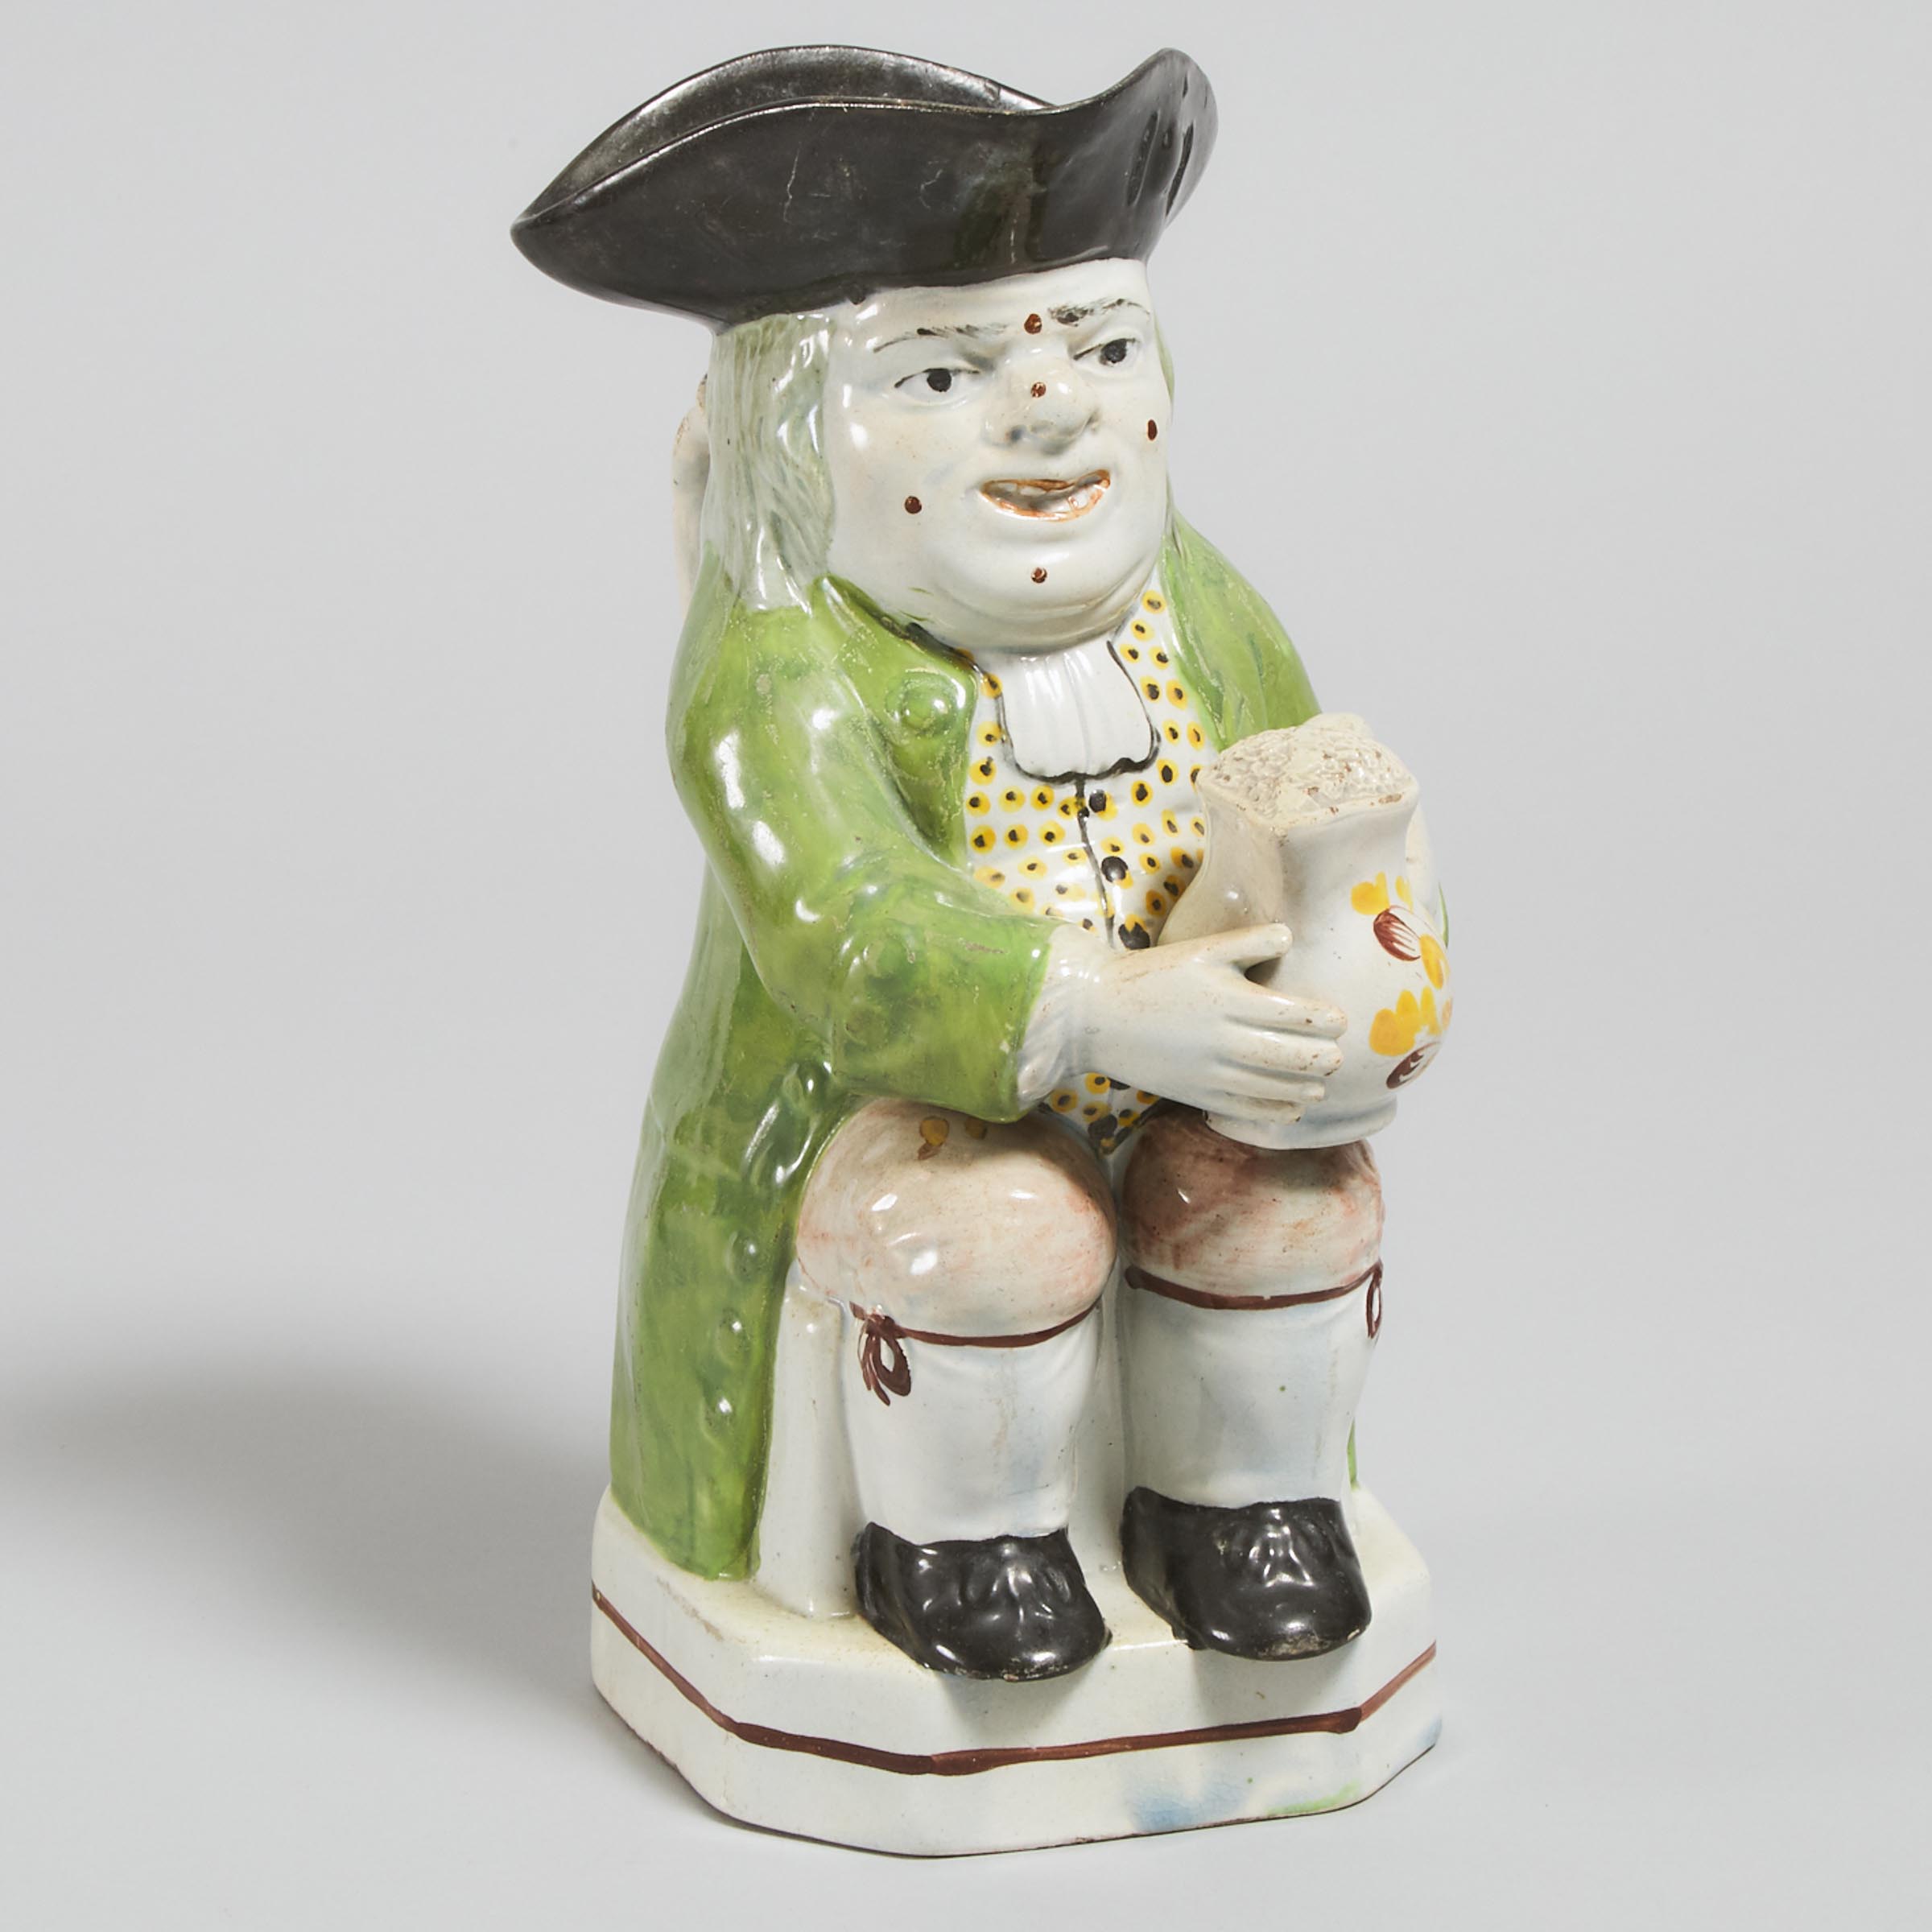 Staffordshire Pearlware Toby Jug, early 19th century